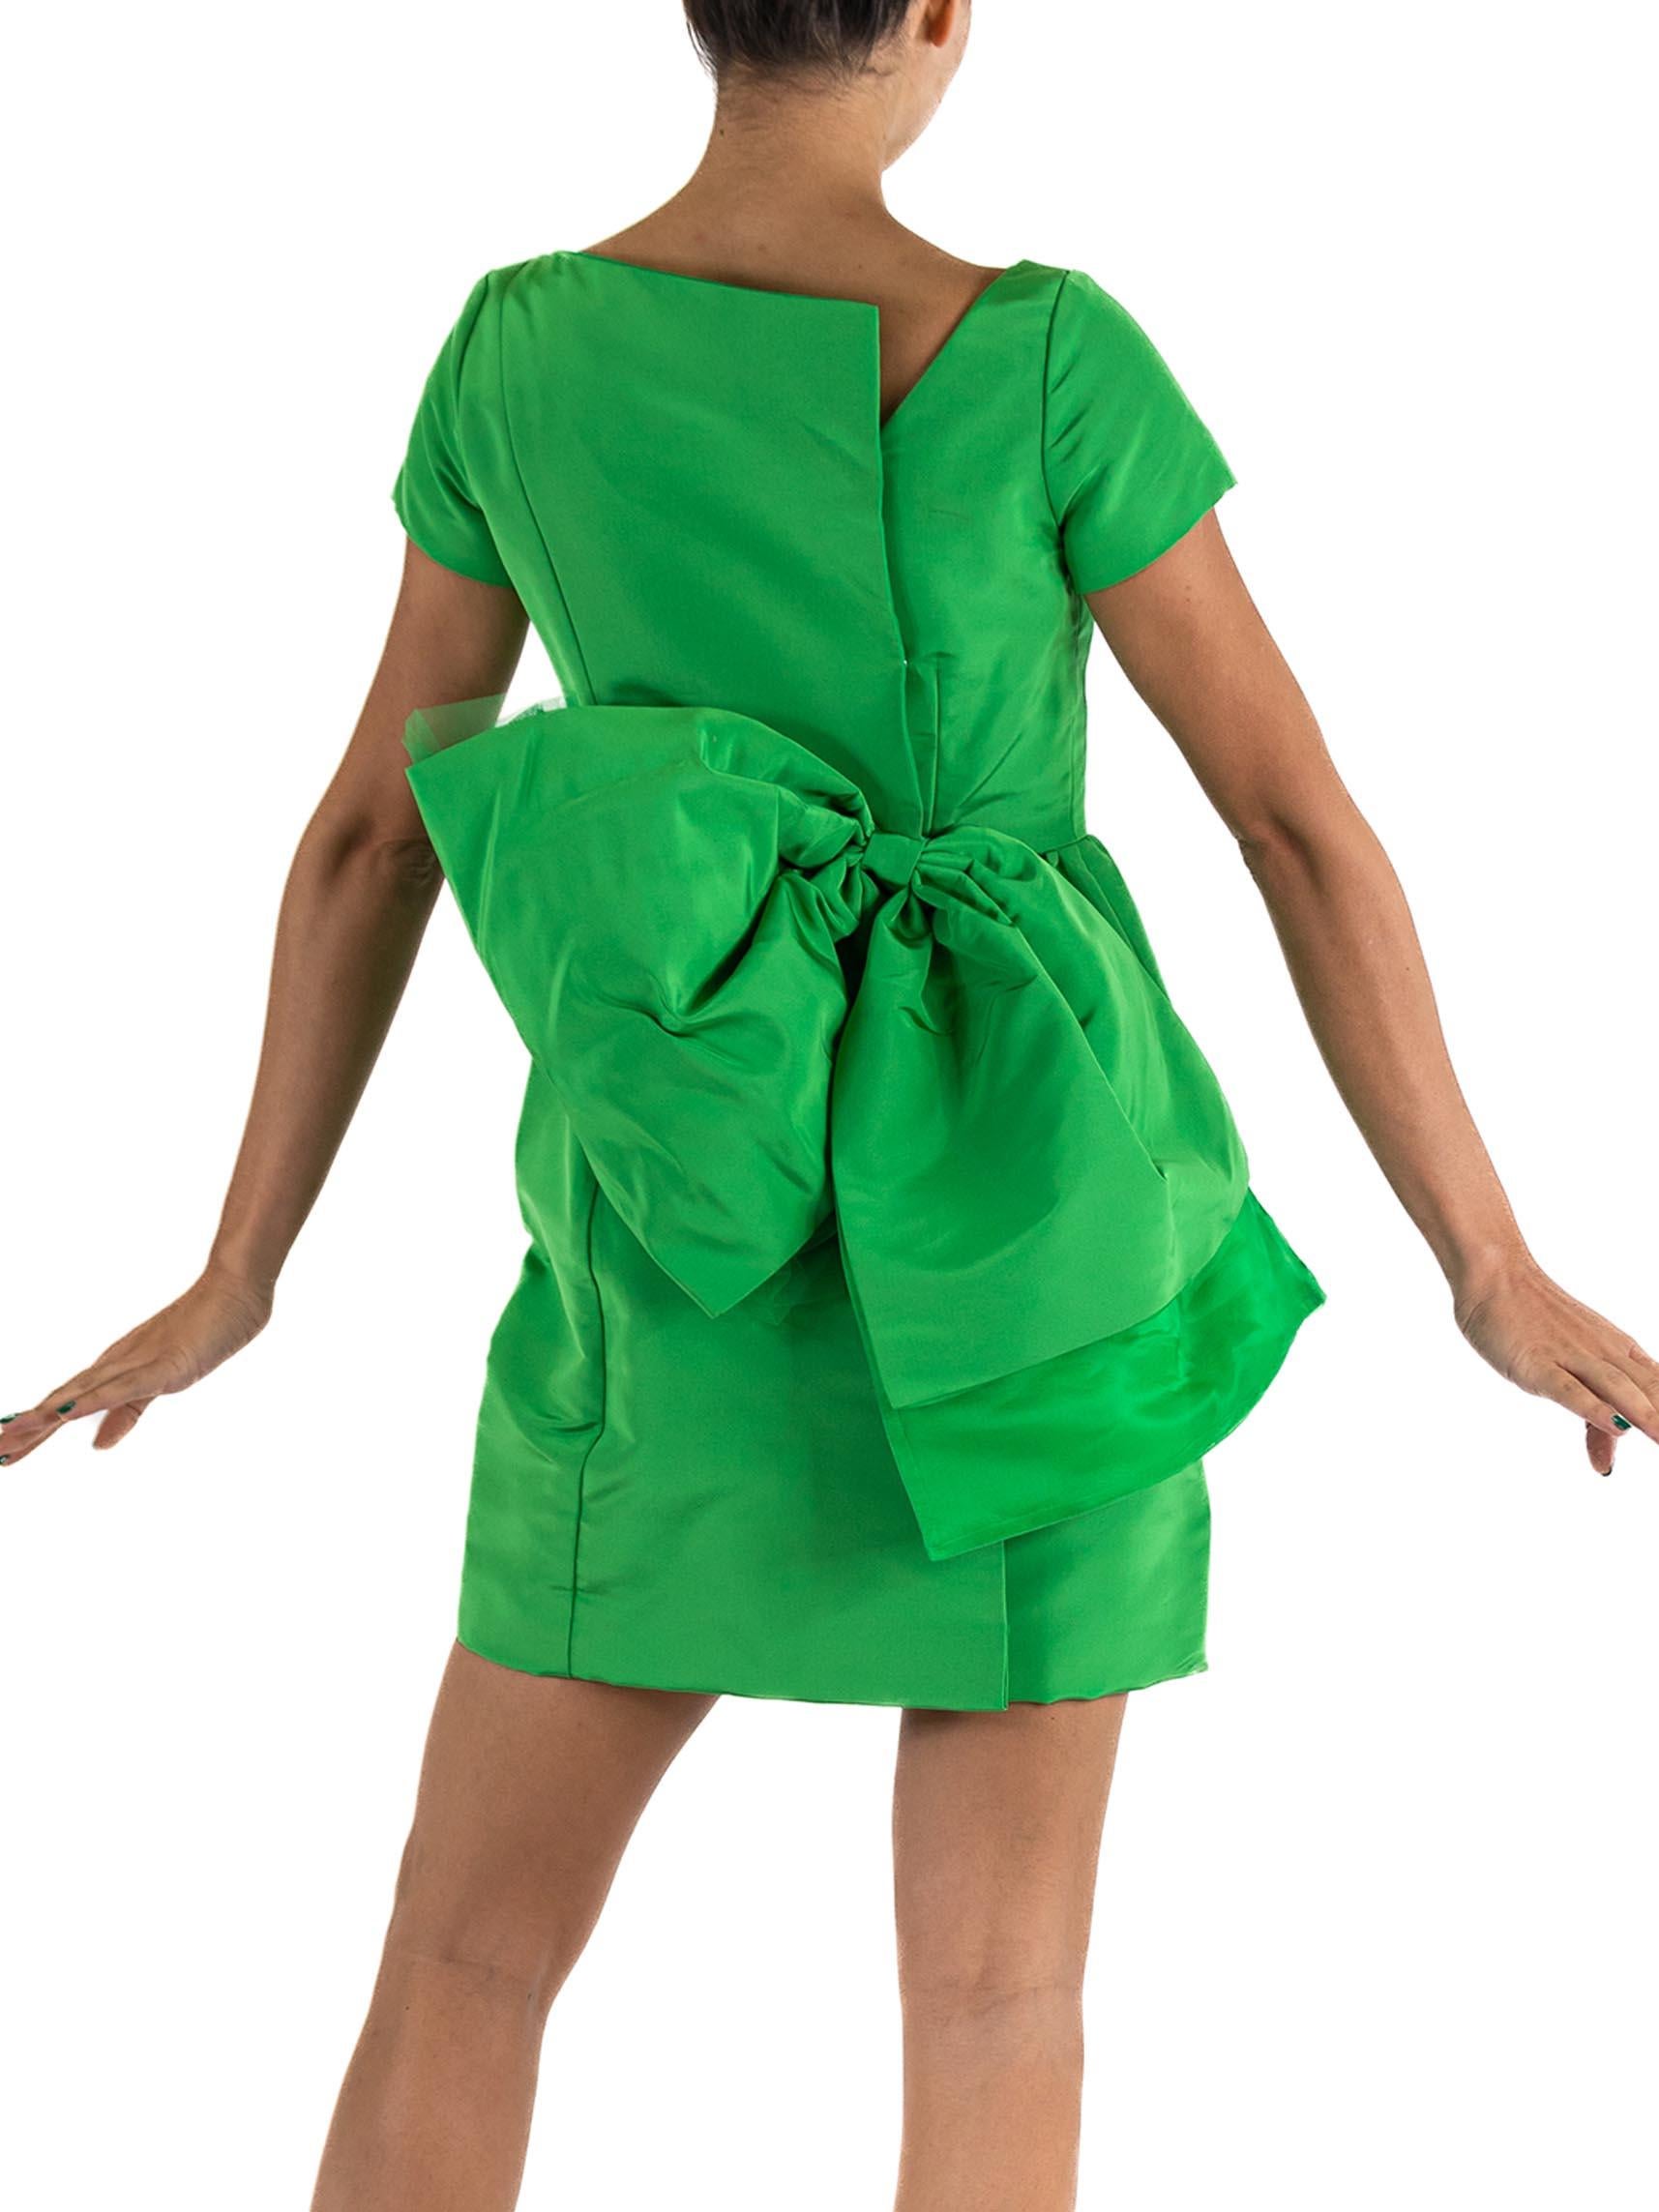 1990S ISAAC MIZRAHI Lime Green Silk Faille Cocktail Dress With Giant Bow Accent In Excellent Condition For Sale In New York, NY